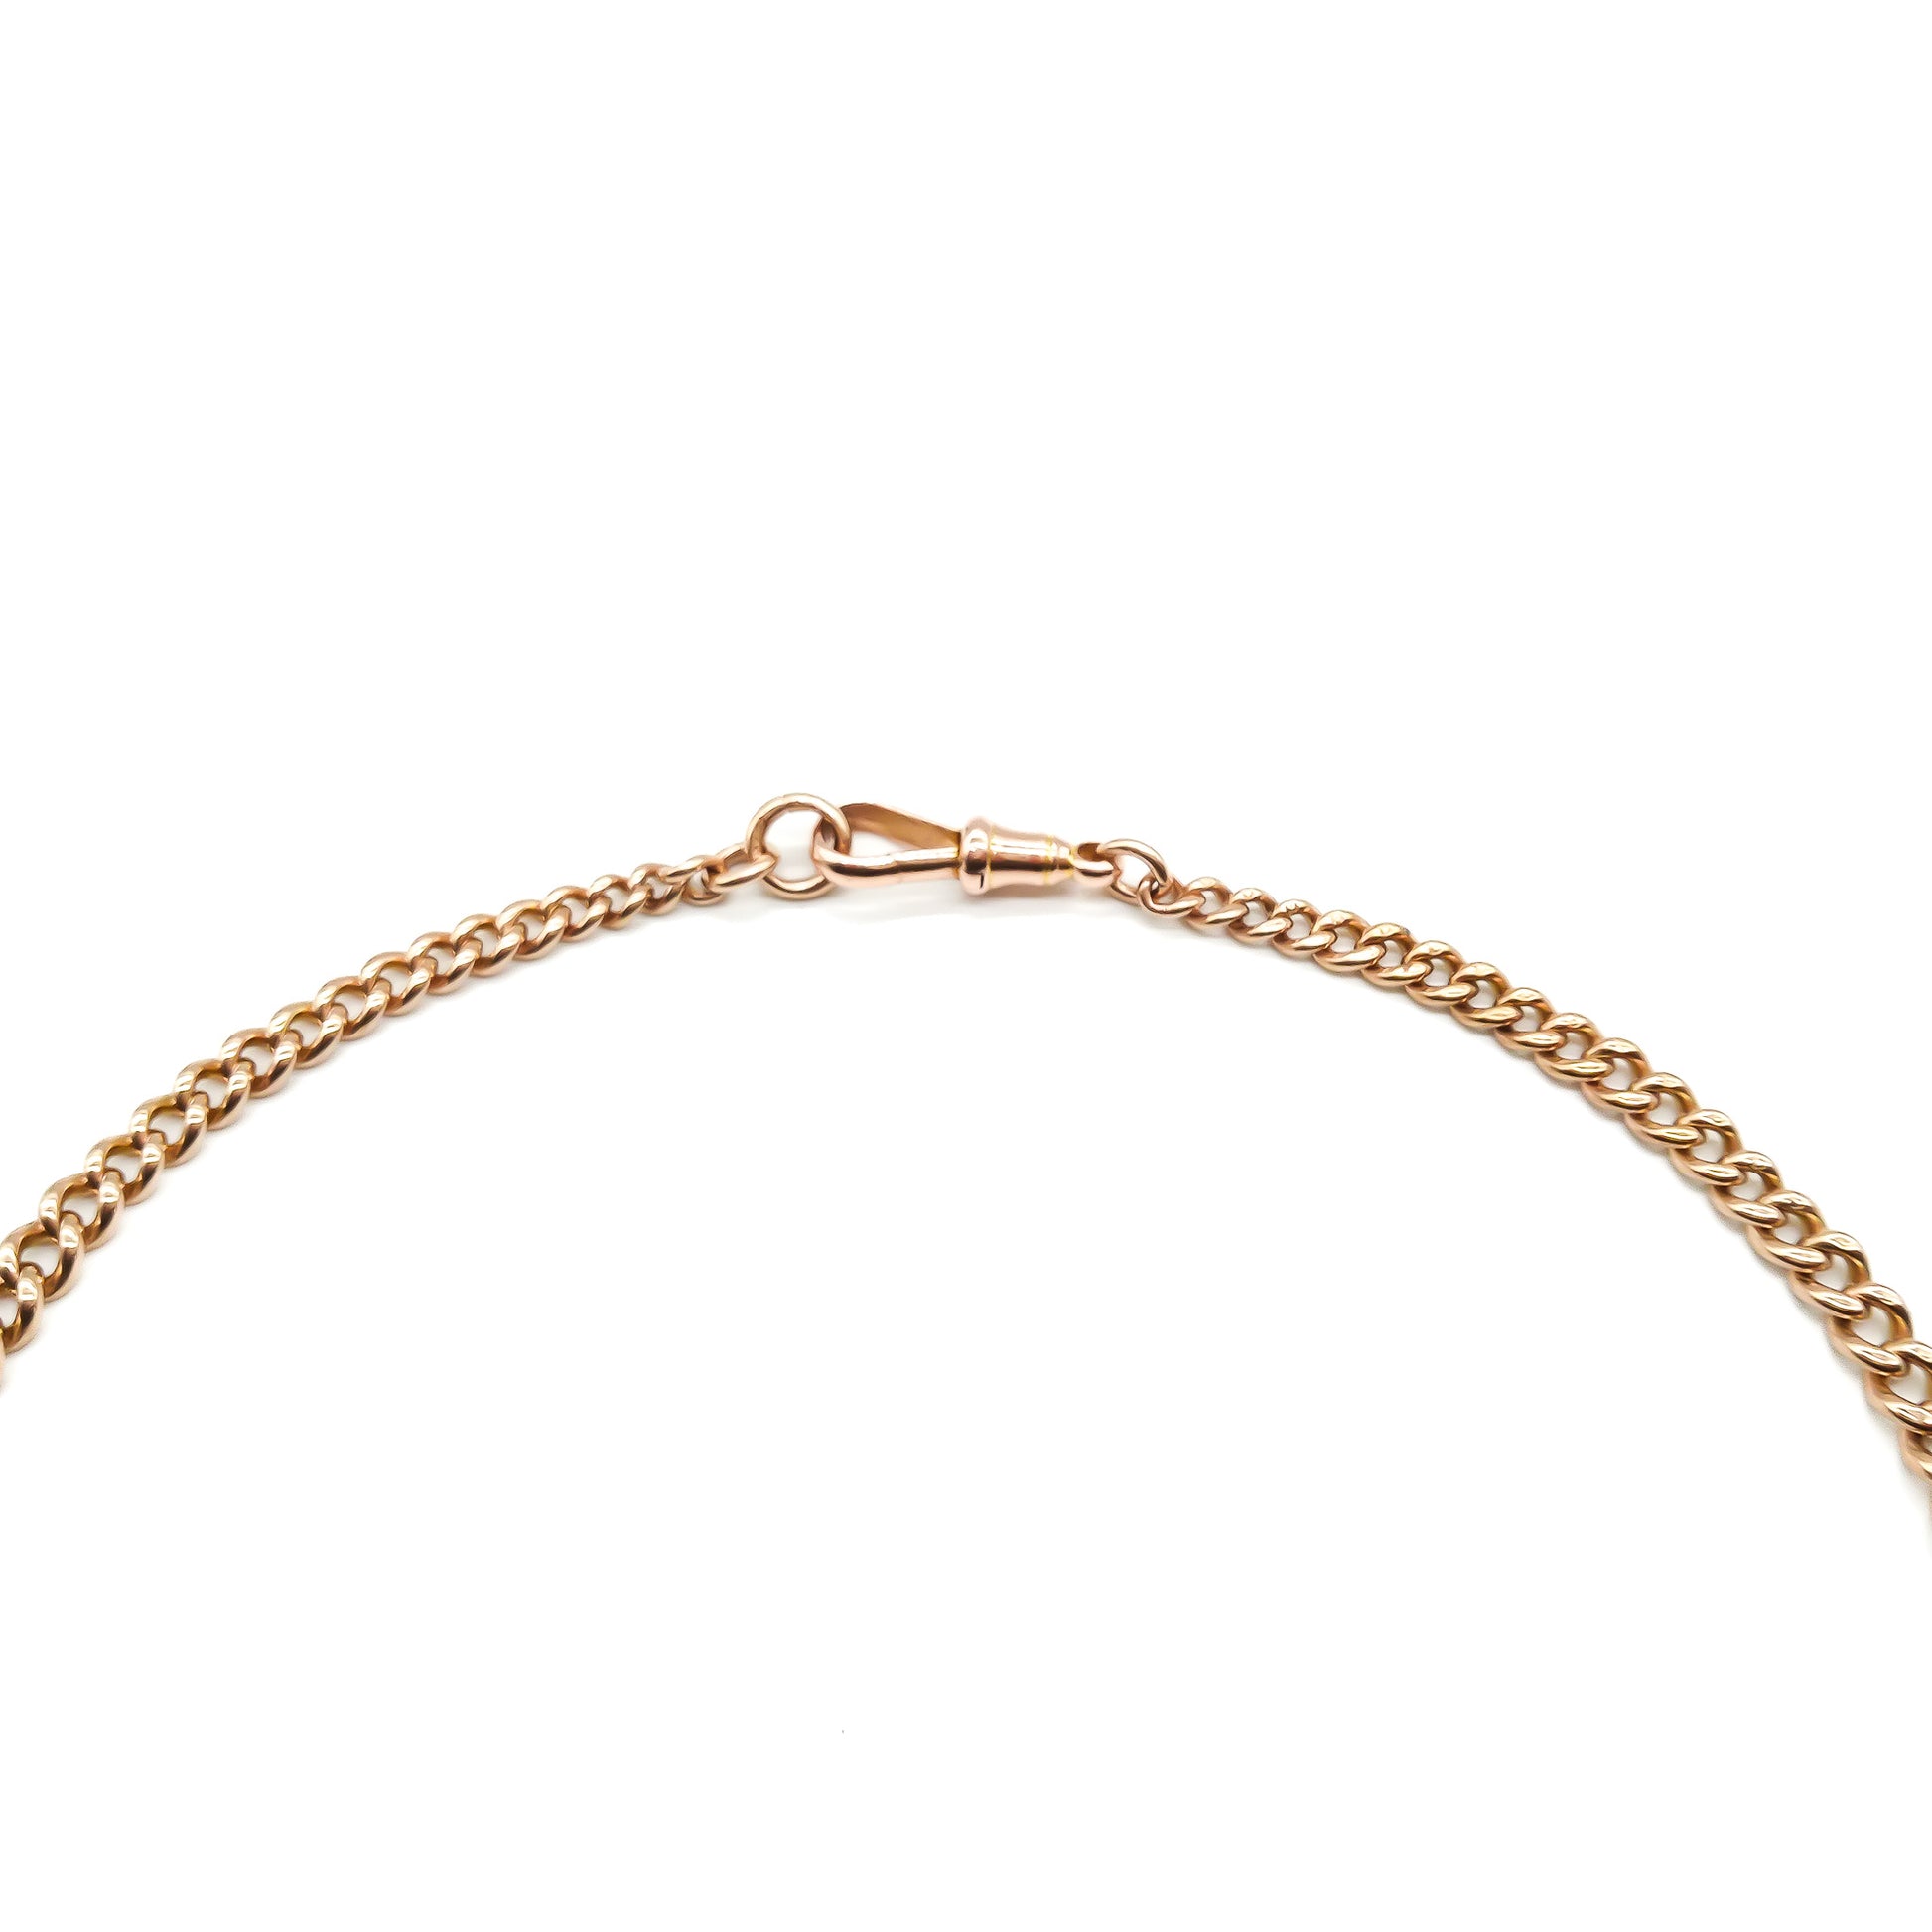 Classic Victorian 9ct rose gold graduated curb link fob chain with a dog-clip and T-bar.